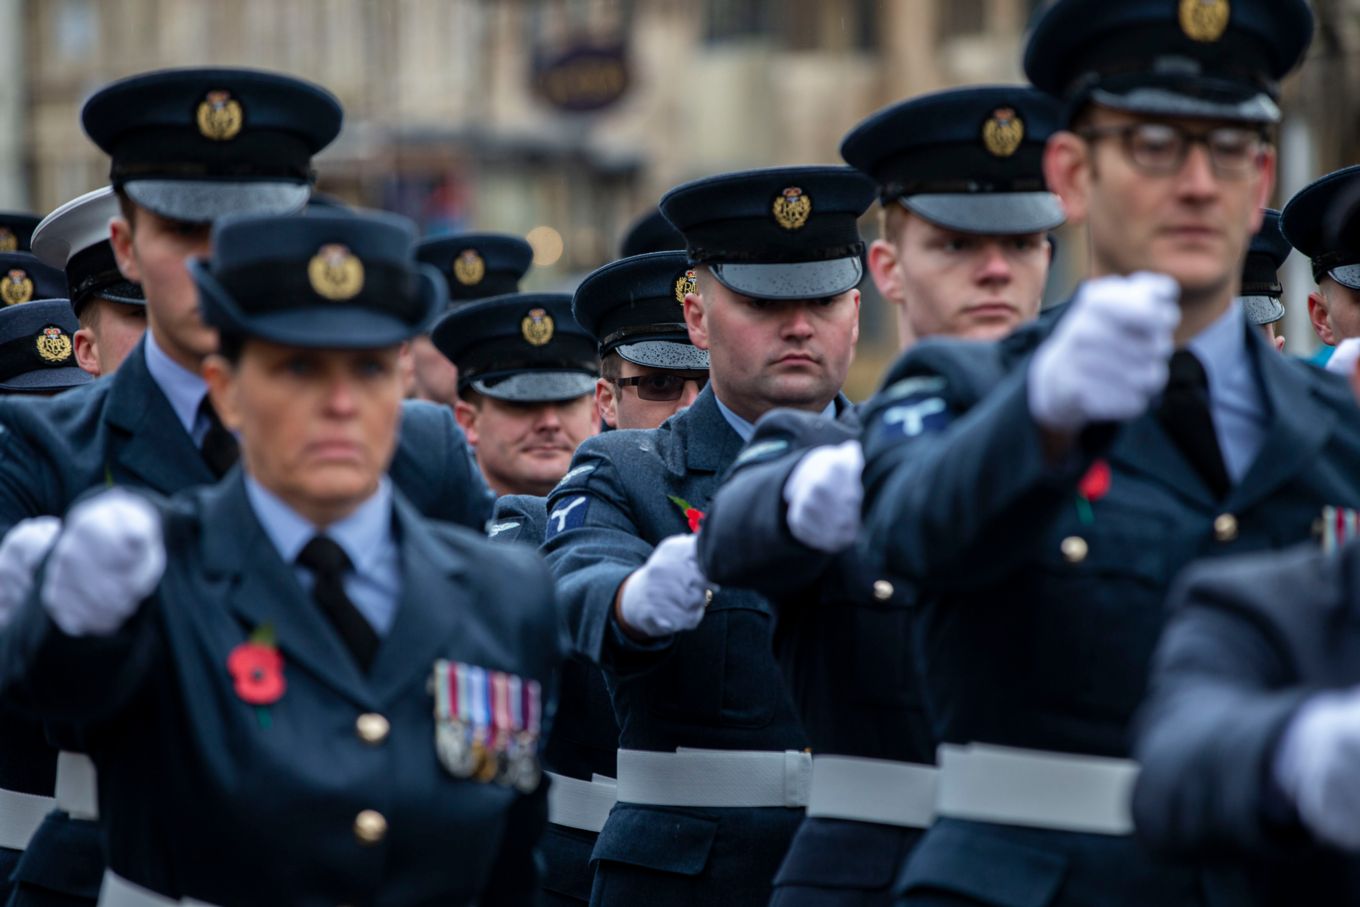 The RAF Wittering detachment parades through Stamford